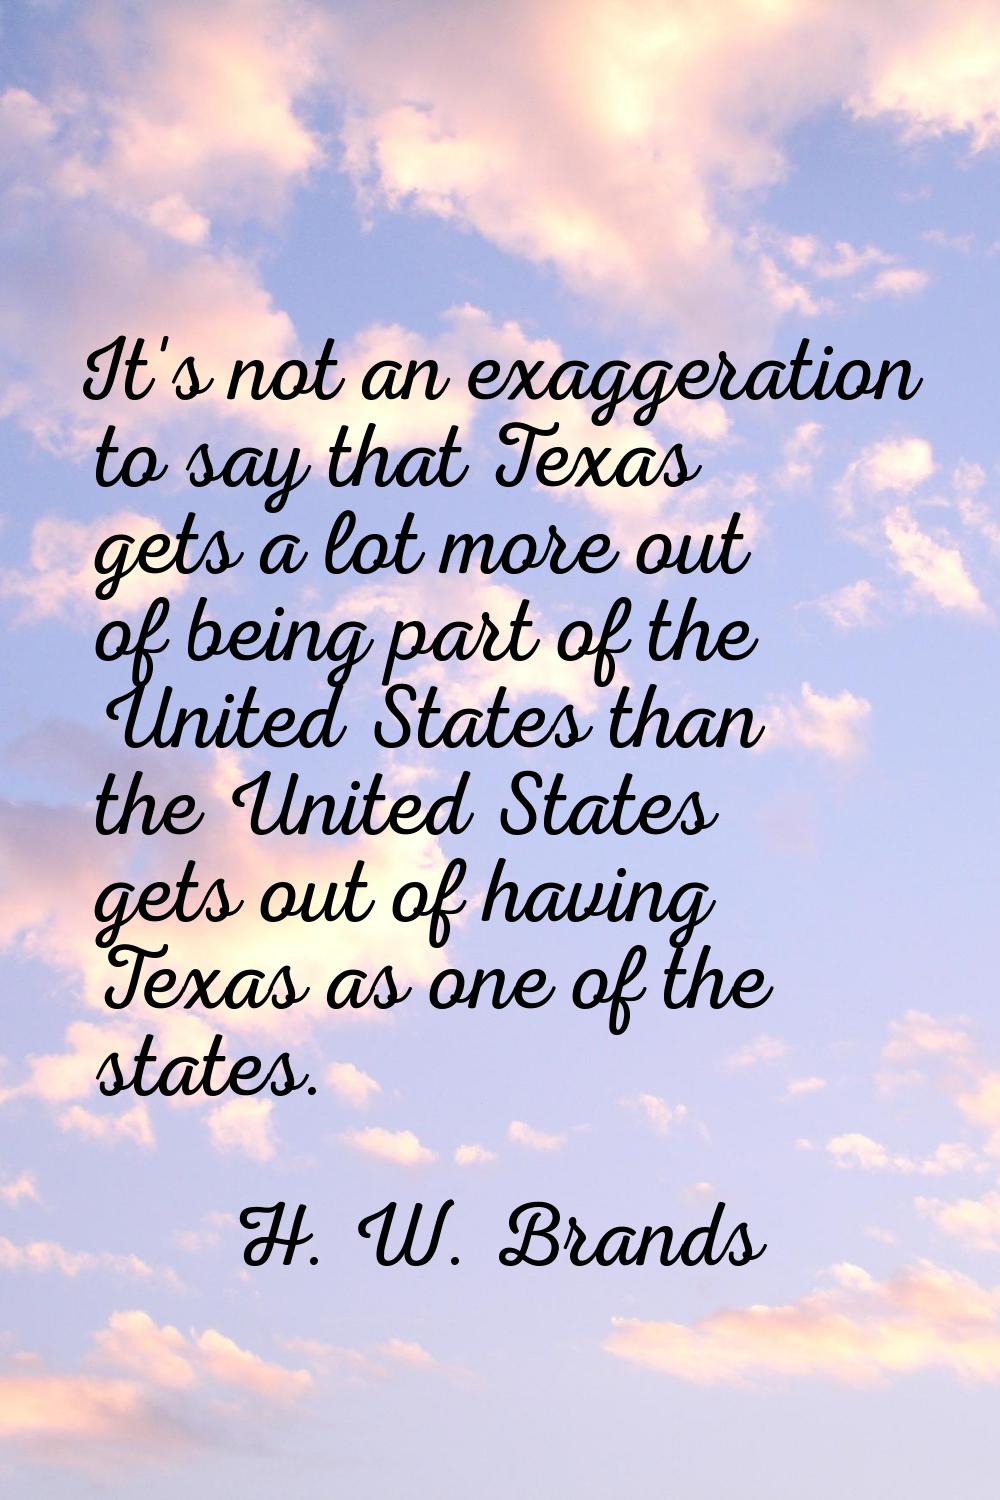 It's not an exaggeration to say that Texas gets a lot more out of being part of the United States t